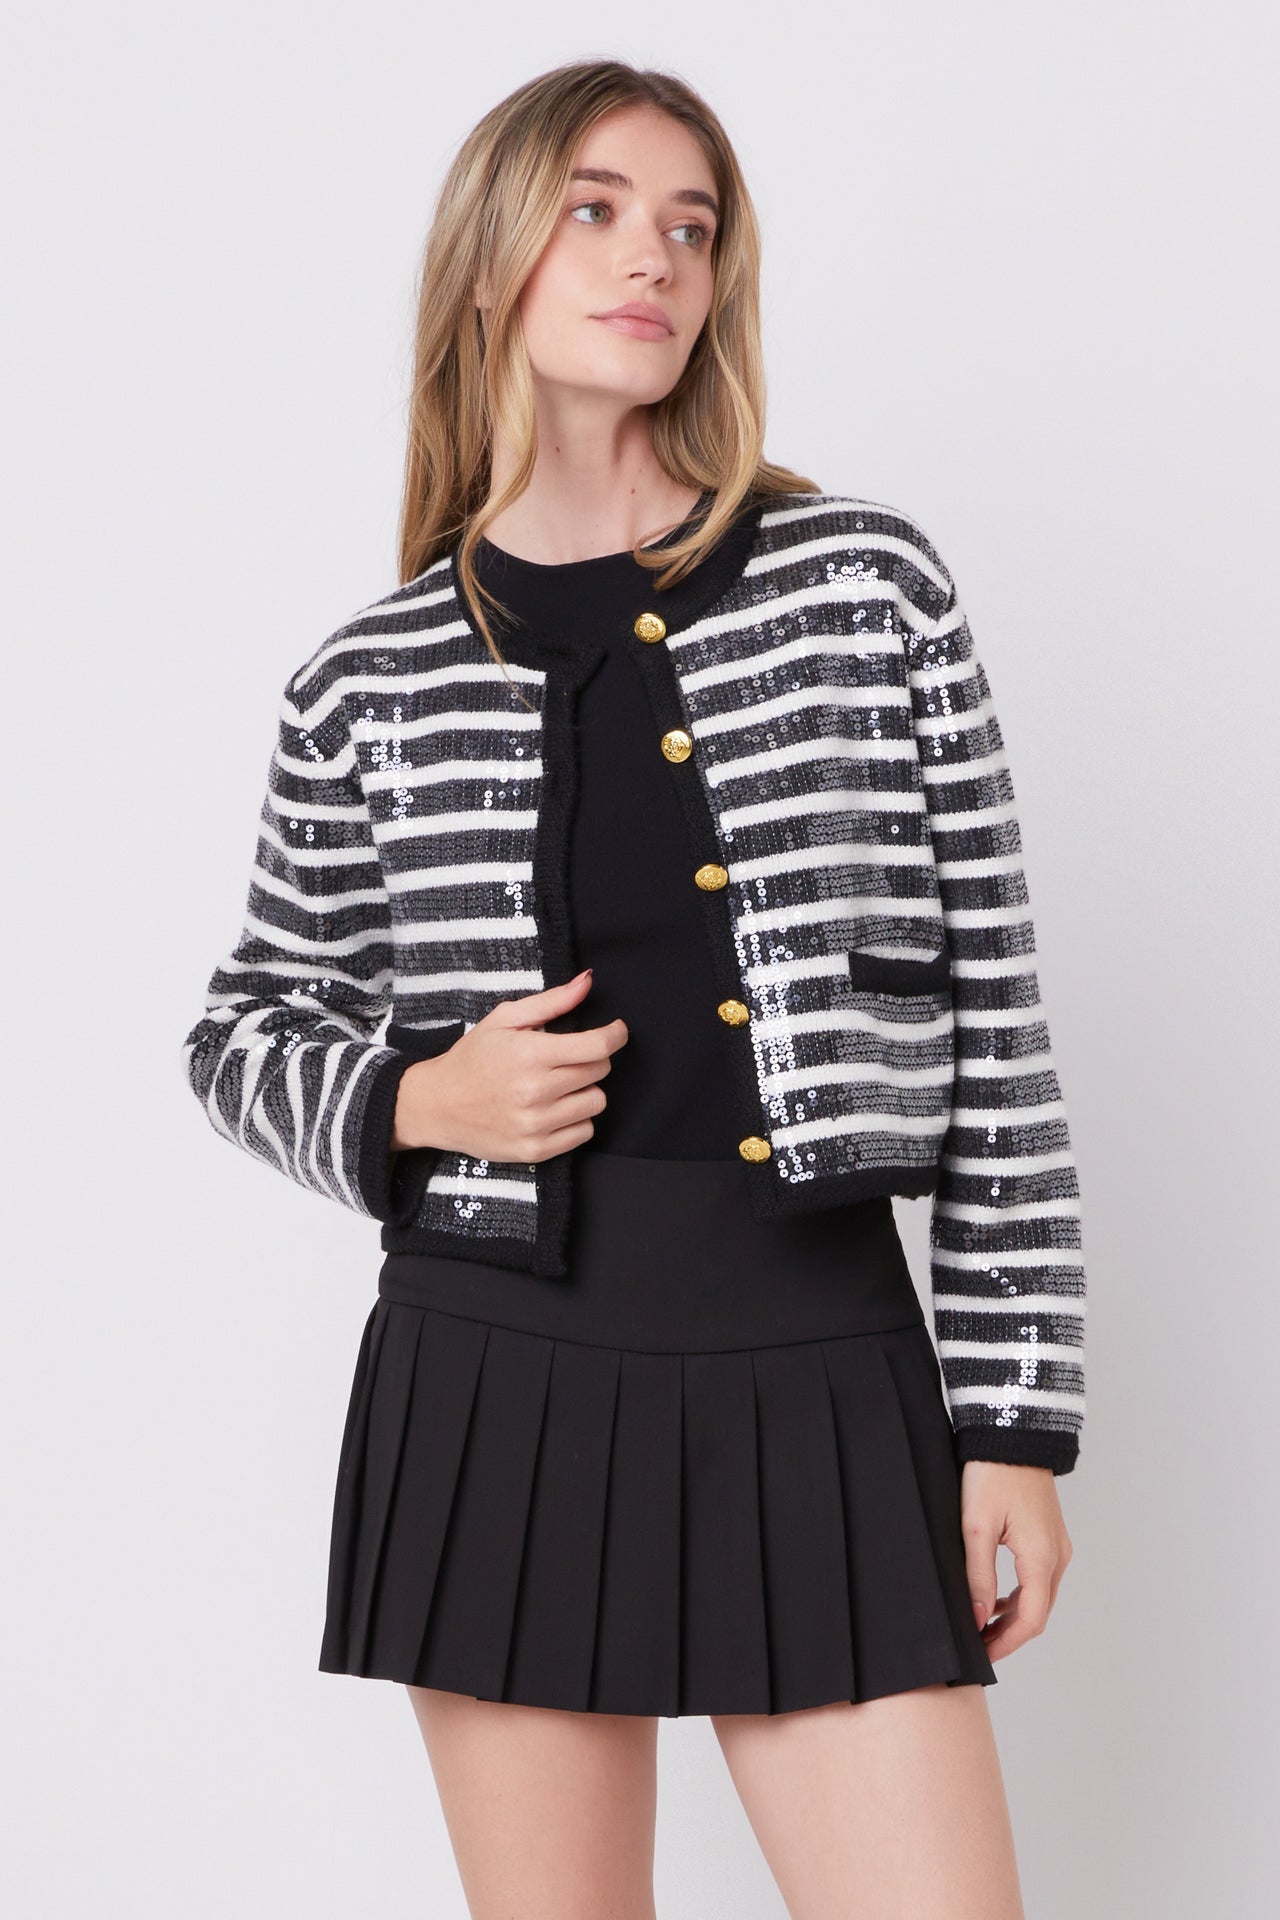 ENGLISH FACTORY - Sequin Striped Knit Cardigan - JACKETS available at Objectrare